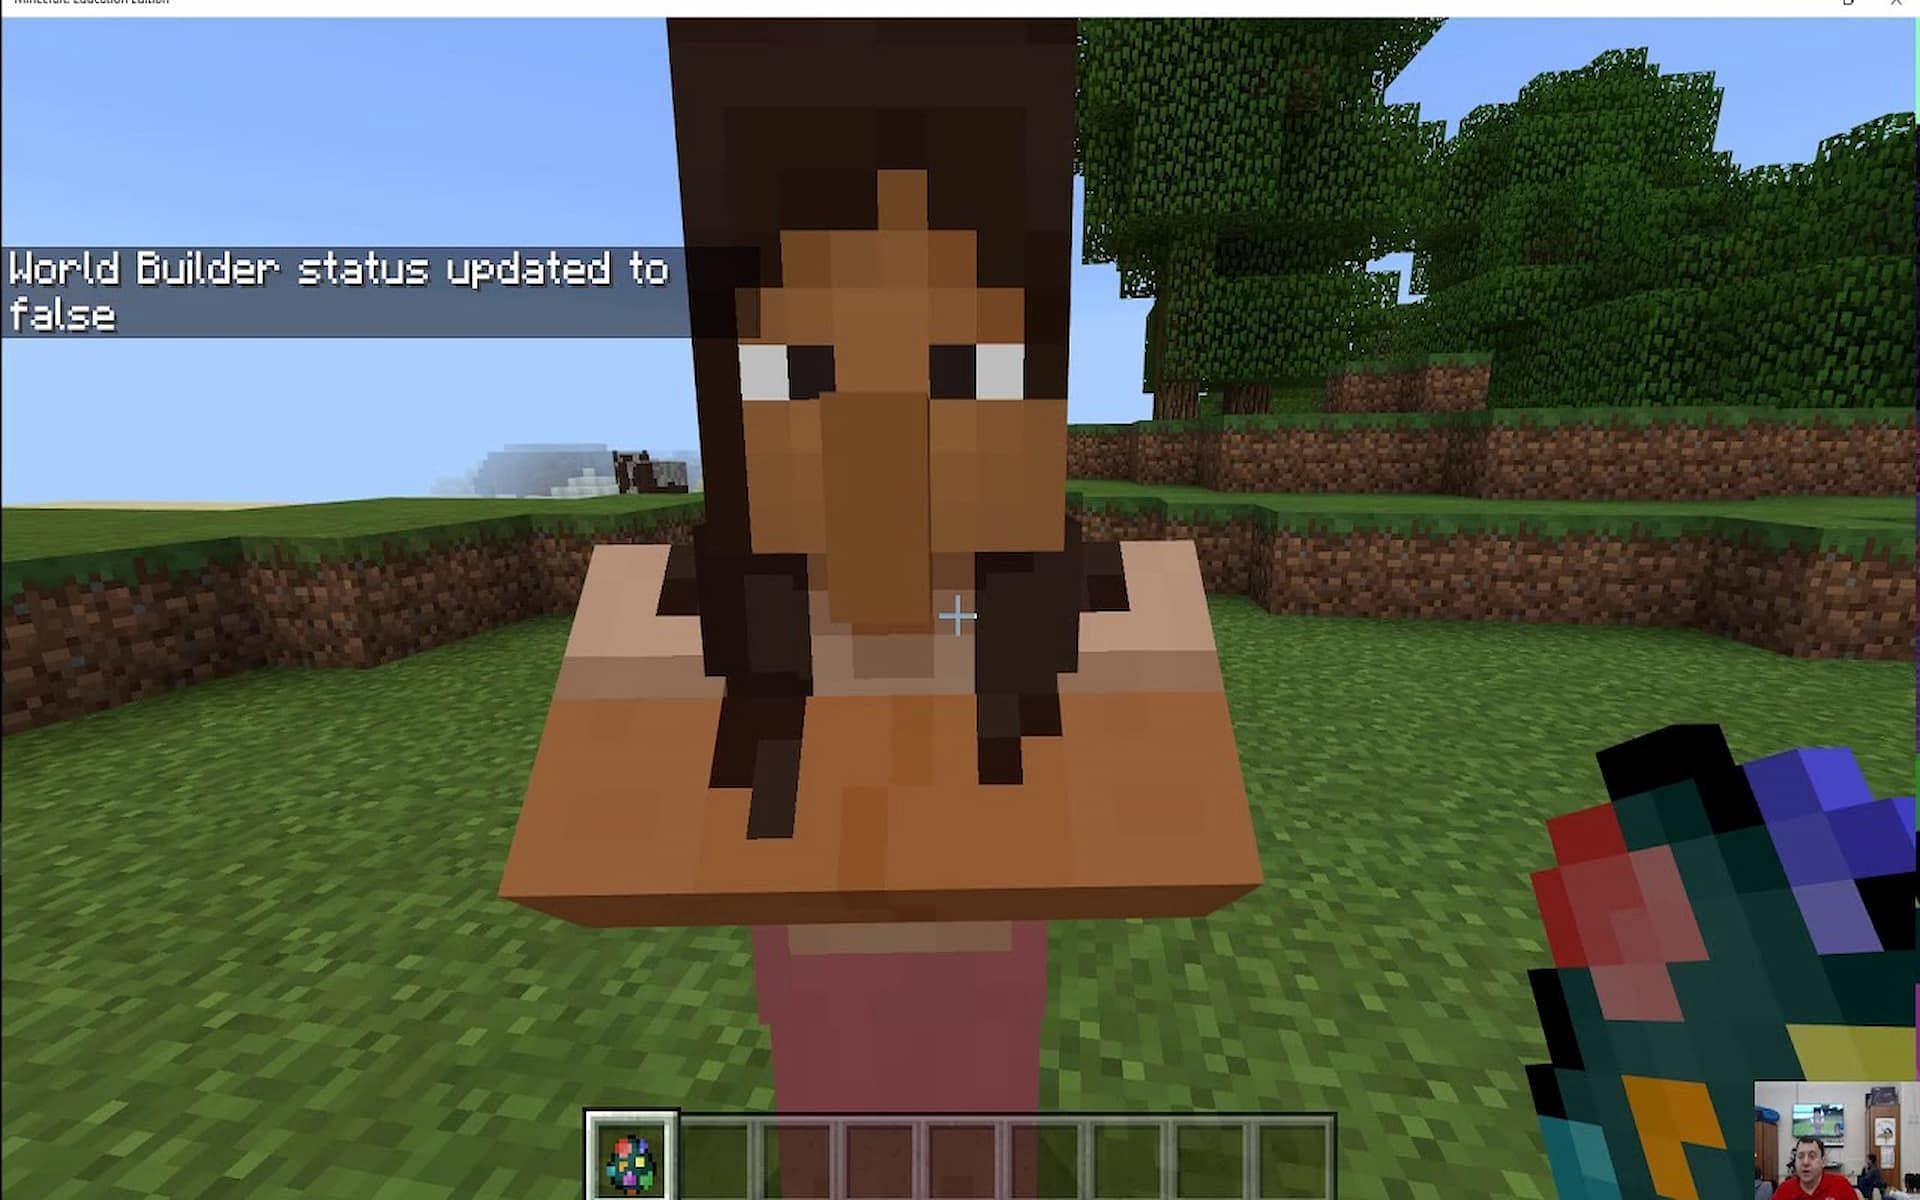 Players can use NPCs for a wide variety of learning in Minecraft Education Edition (Image via YouTube/WAMS Game Design)